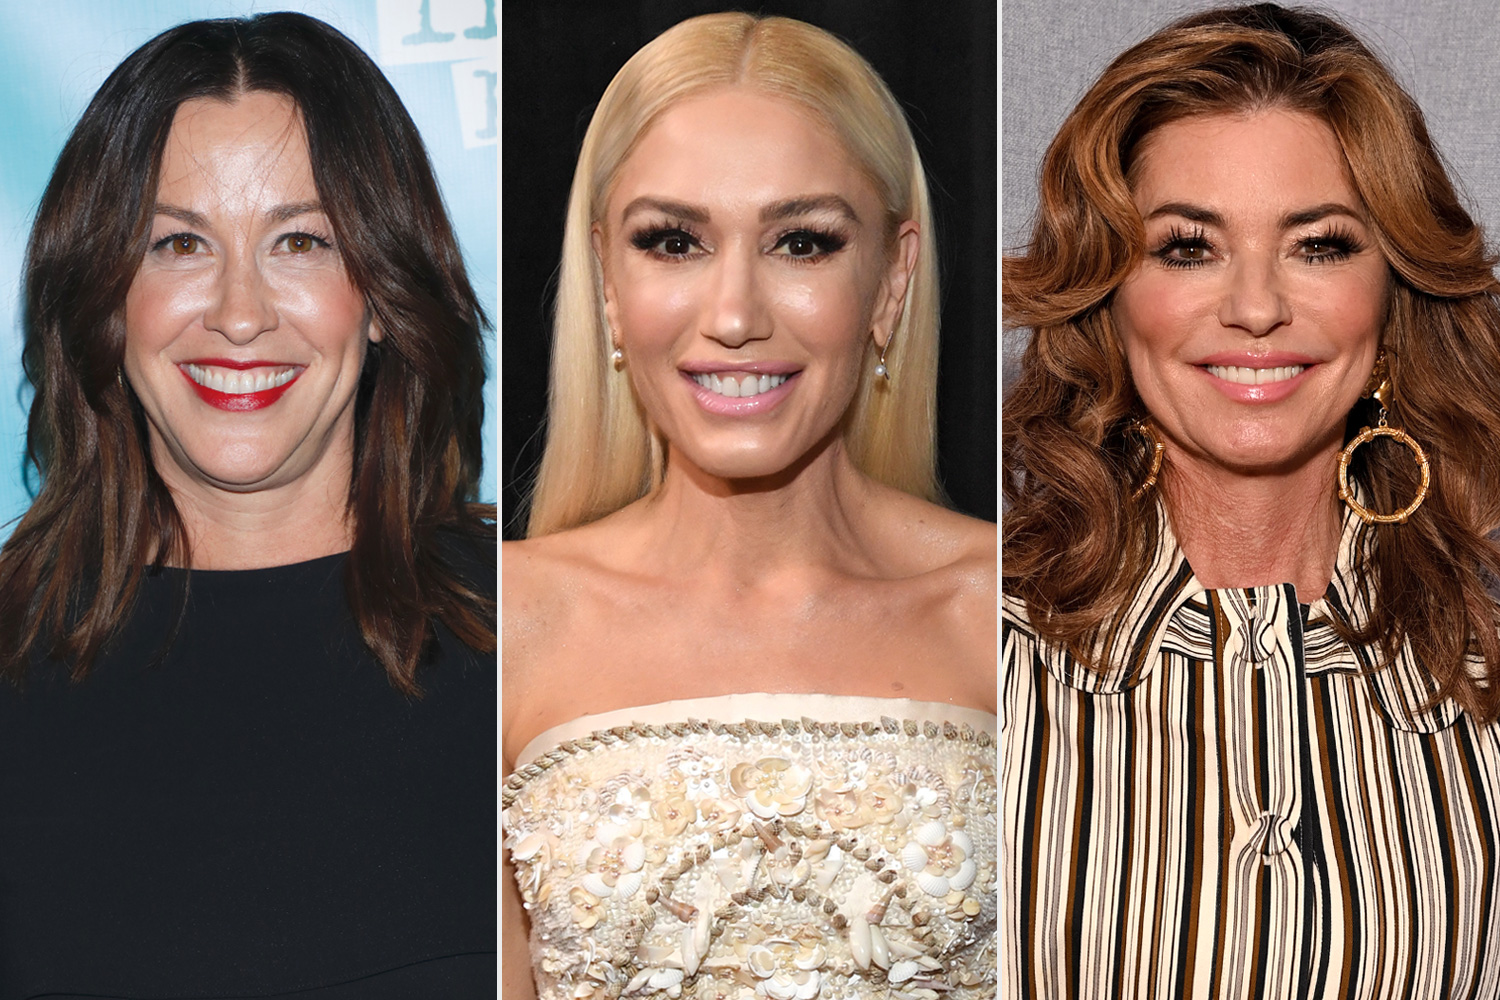 Alanis Morissette, Gwen Stefani and Shania Twain to Perform at the 2023 CMTs